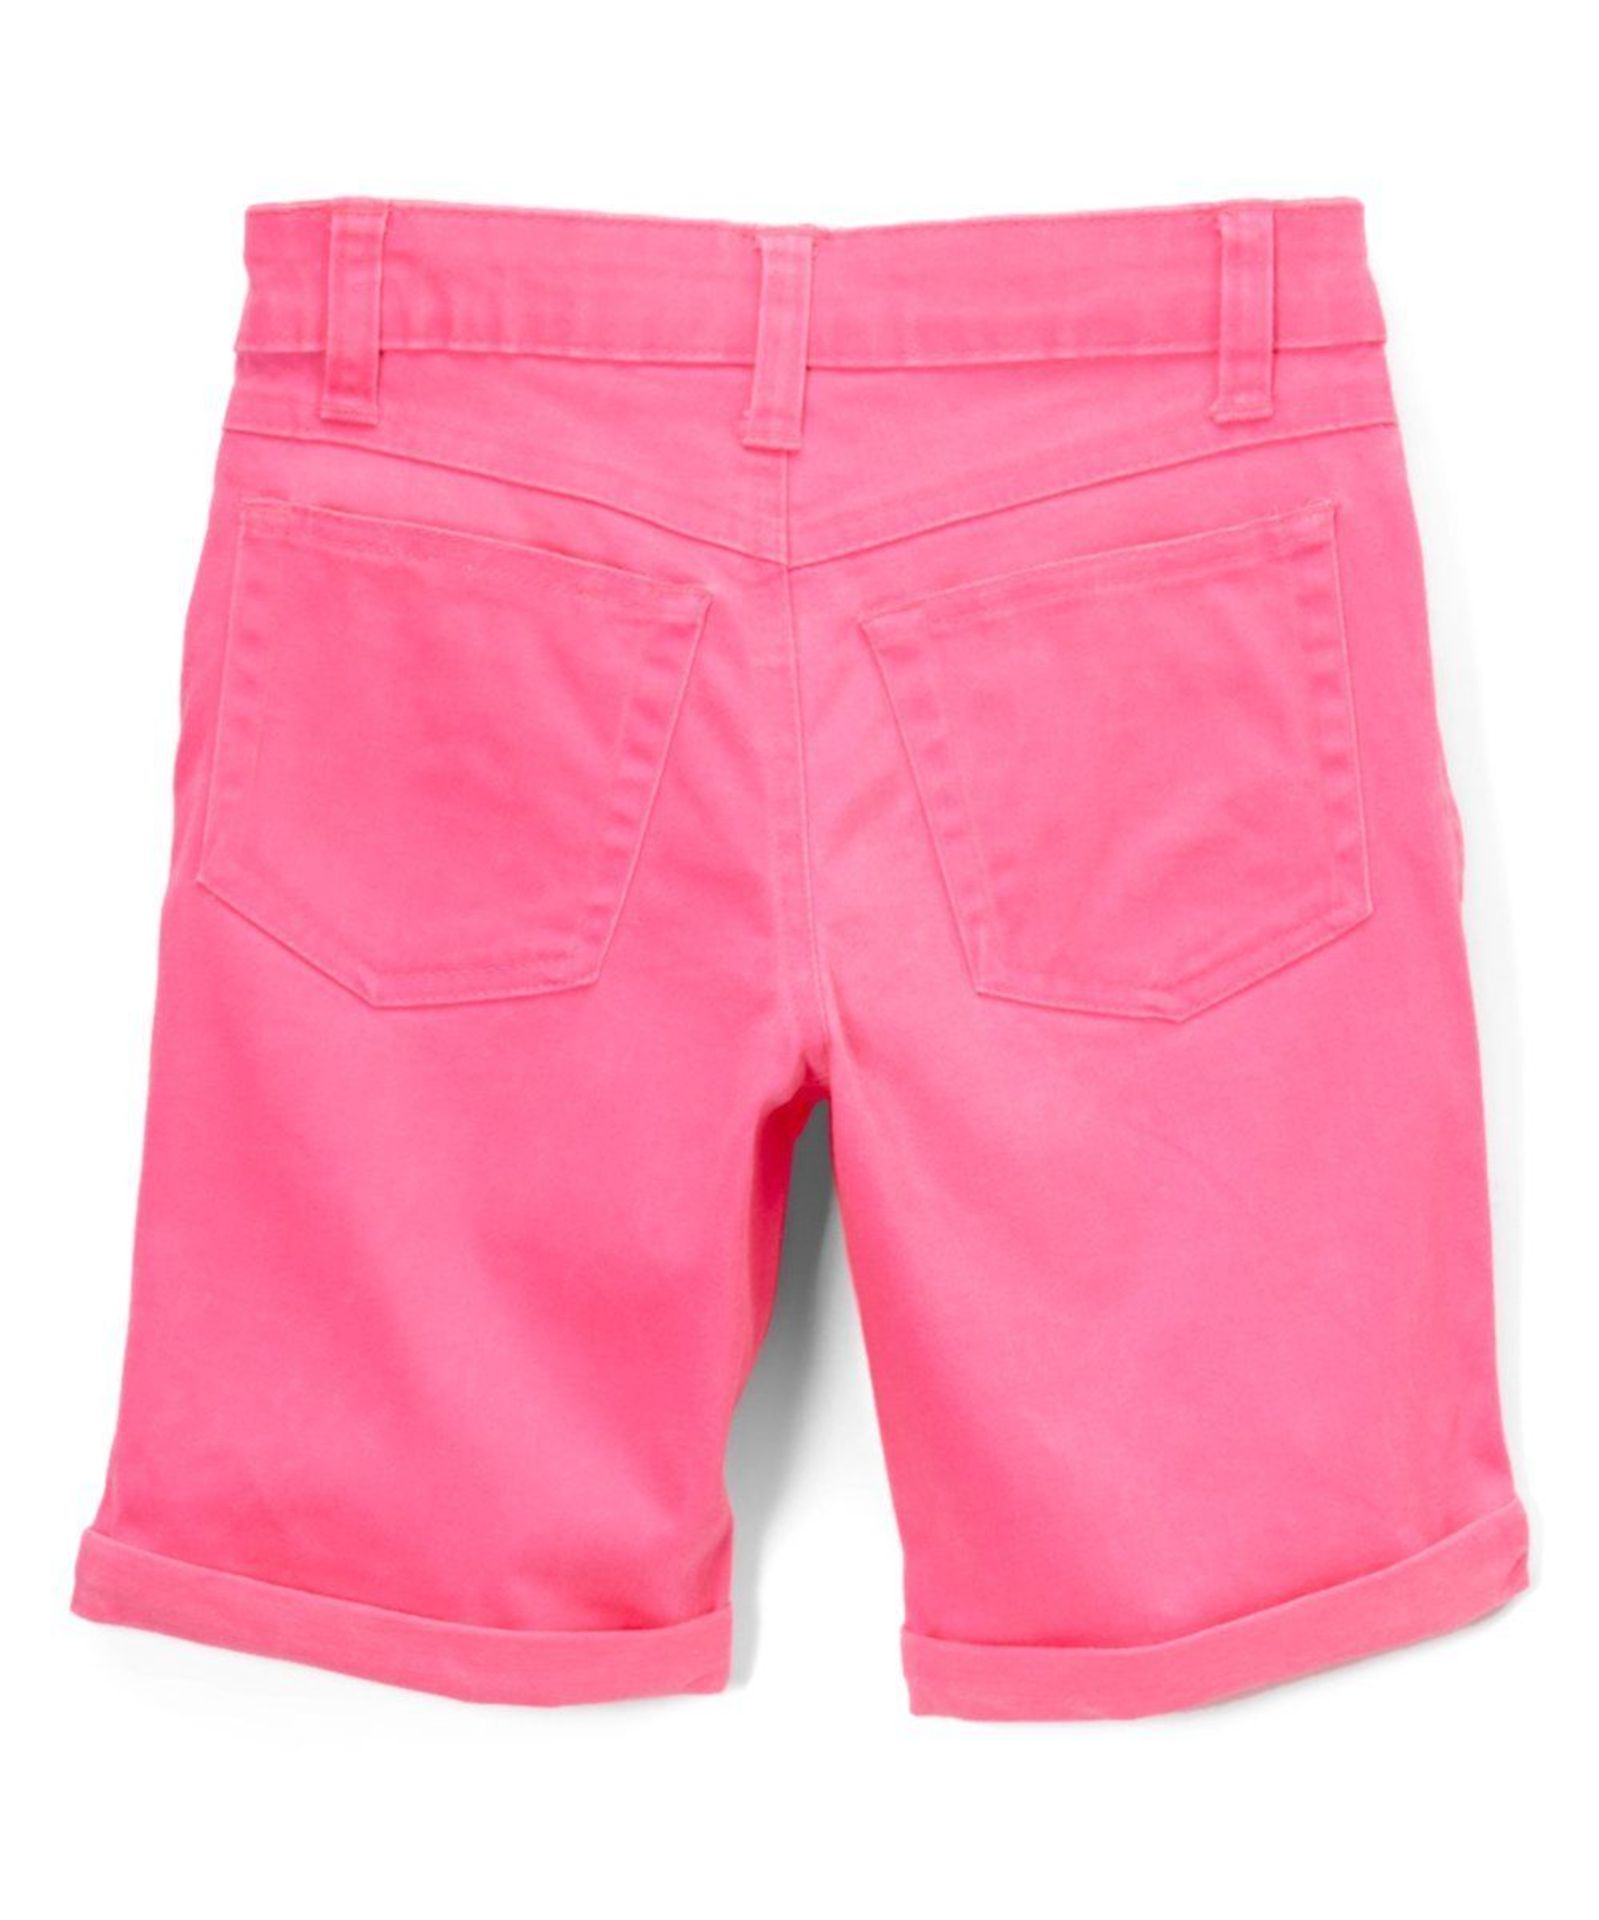 Hello Gorgeous Neon Hot Pink Bermuda Shorts (Age 10 yrs) (New with tags) [Ref: 46173614- T-71] - Image 2 of 2